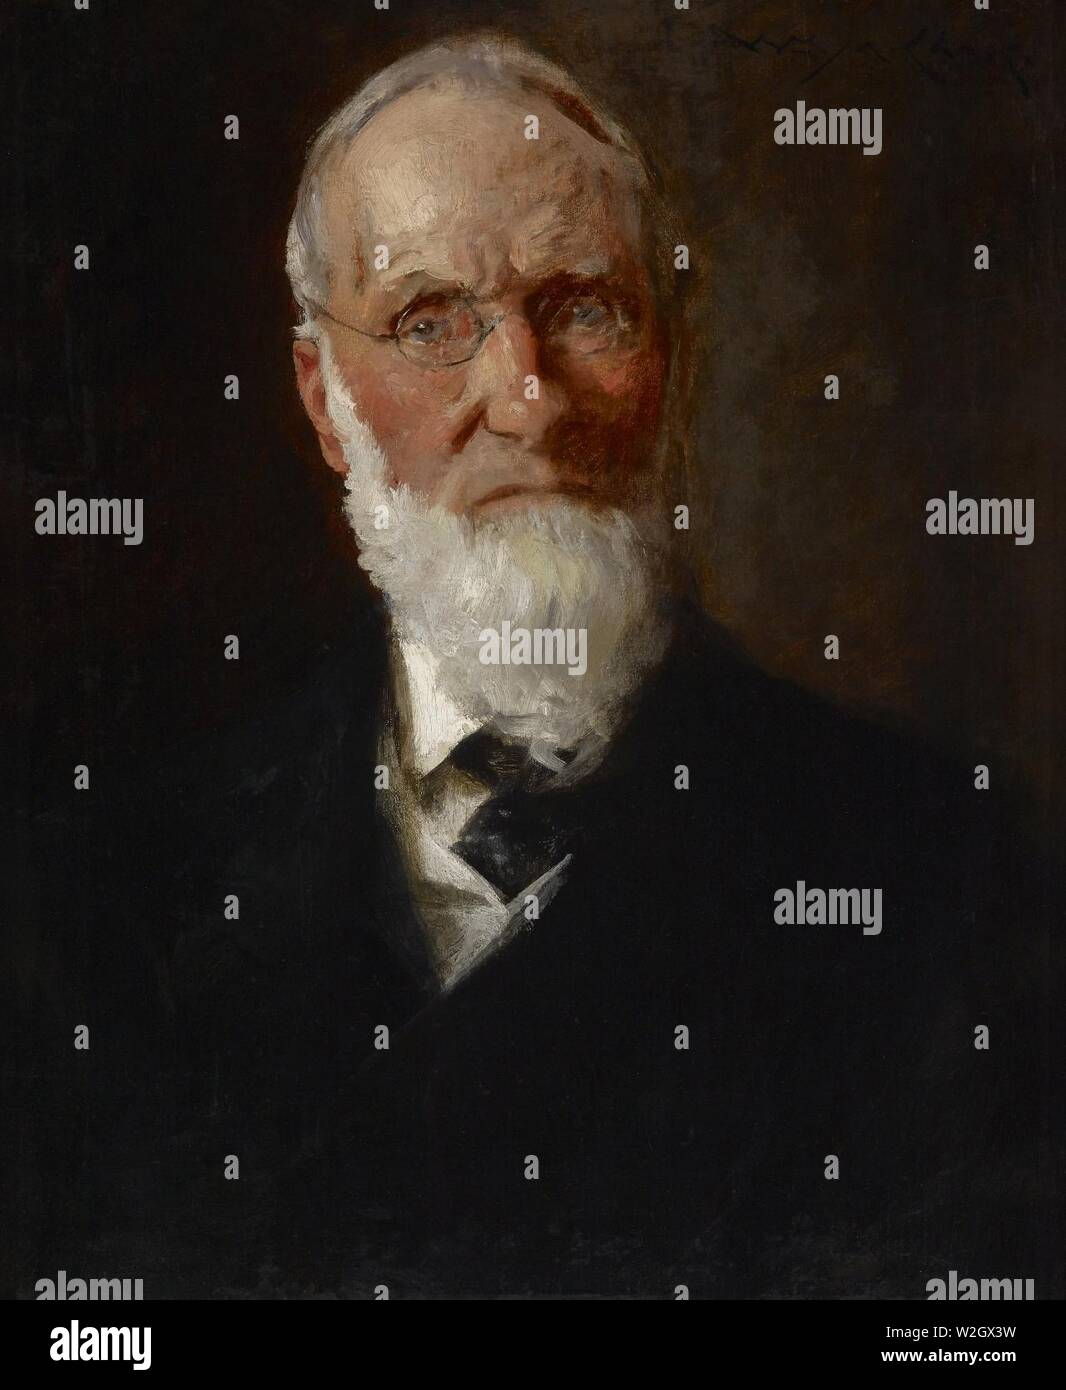 William Merritt Chase - Portrait of My Father (David Hester Chase) - 49.66 - Stock Photo